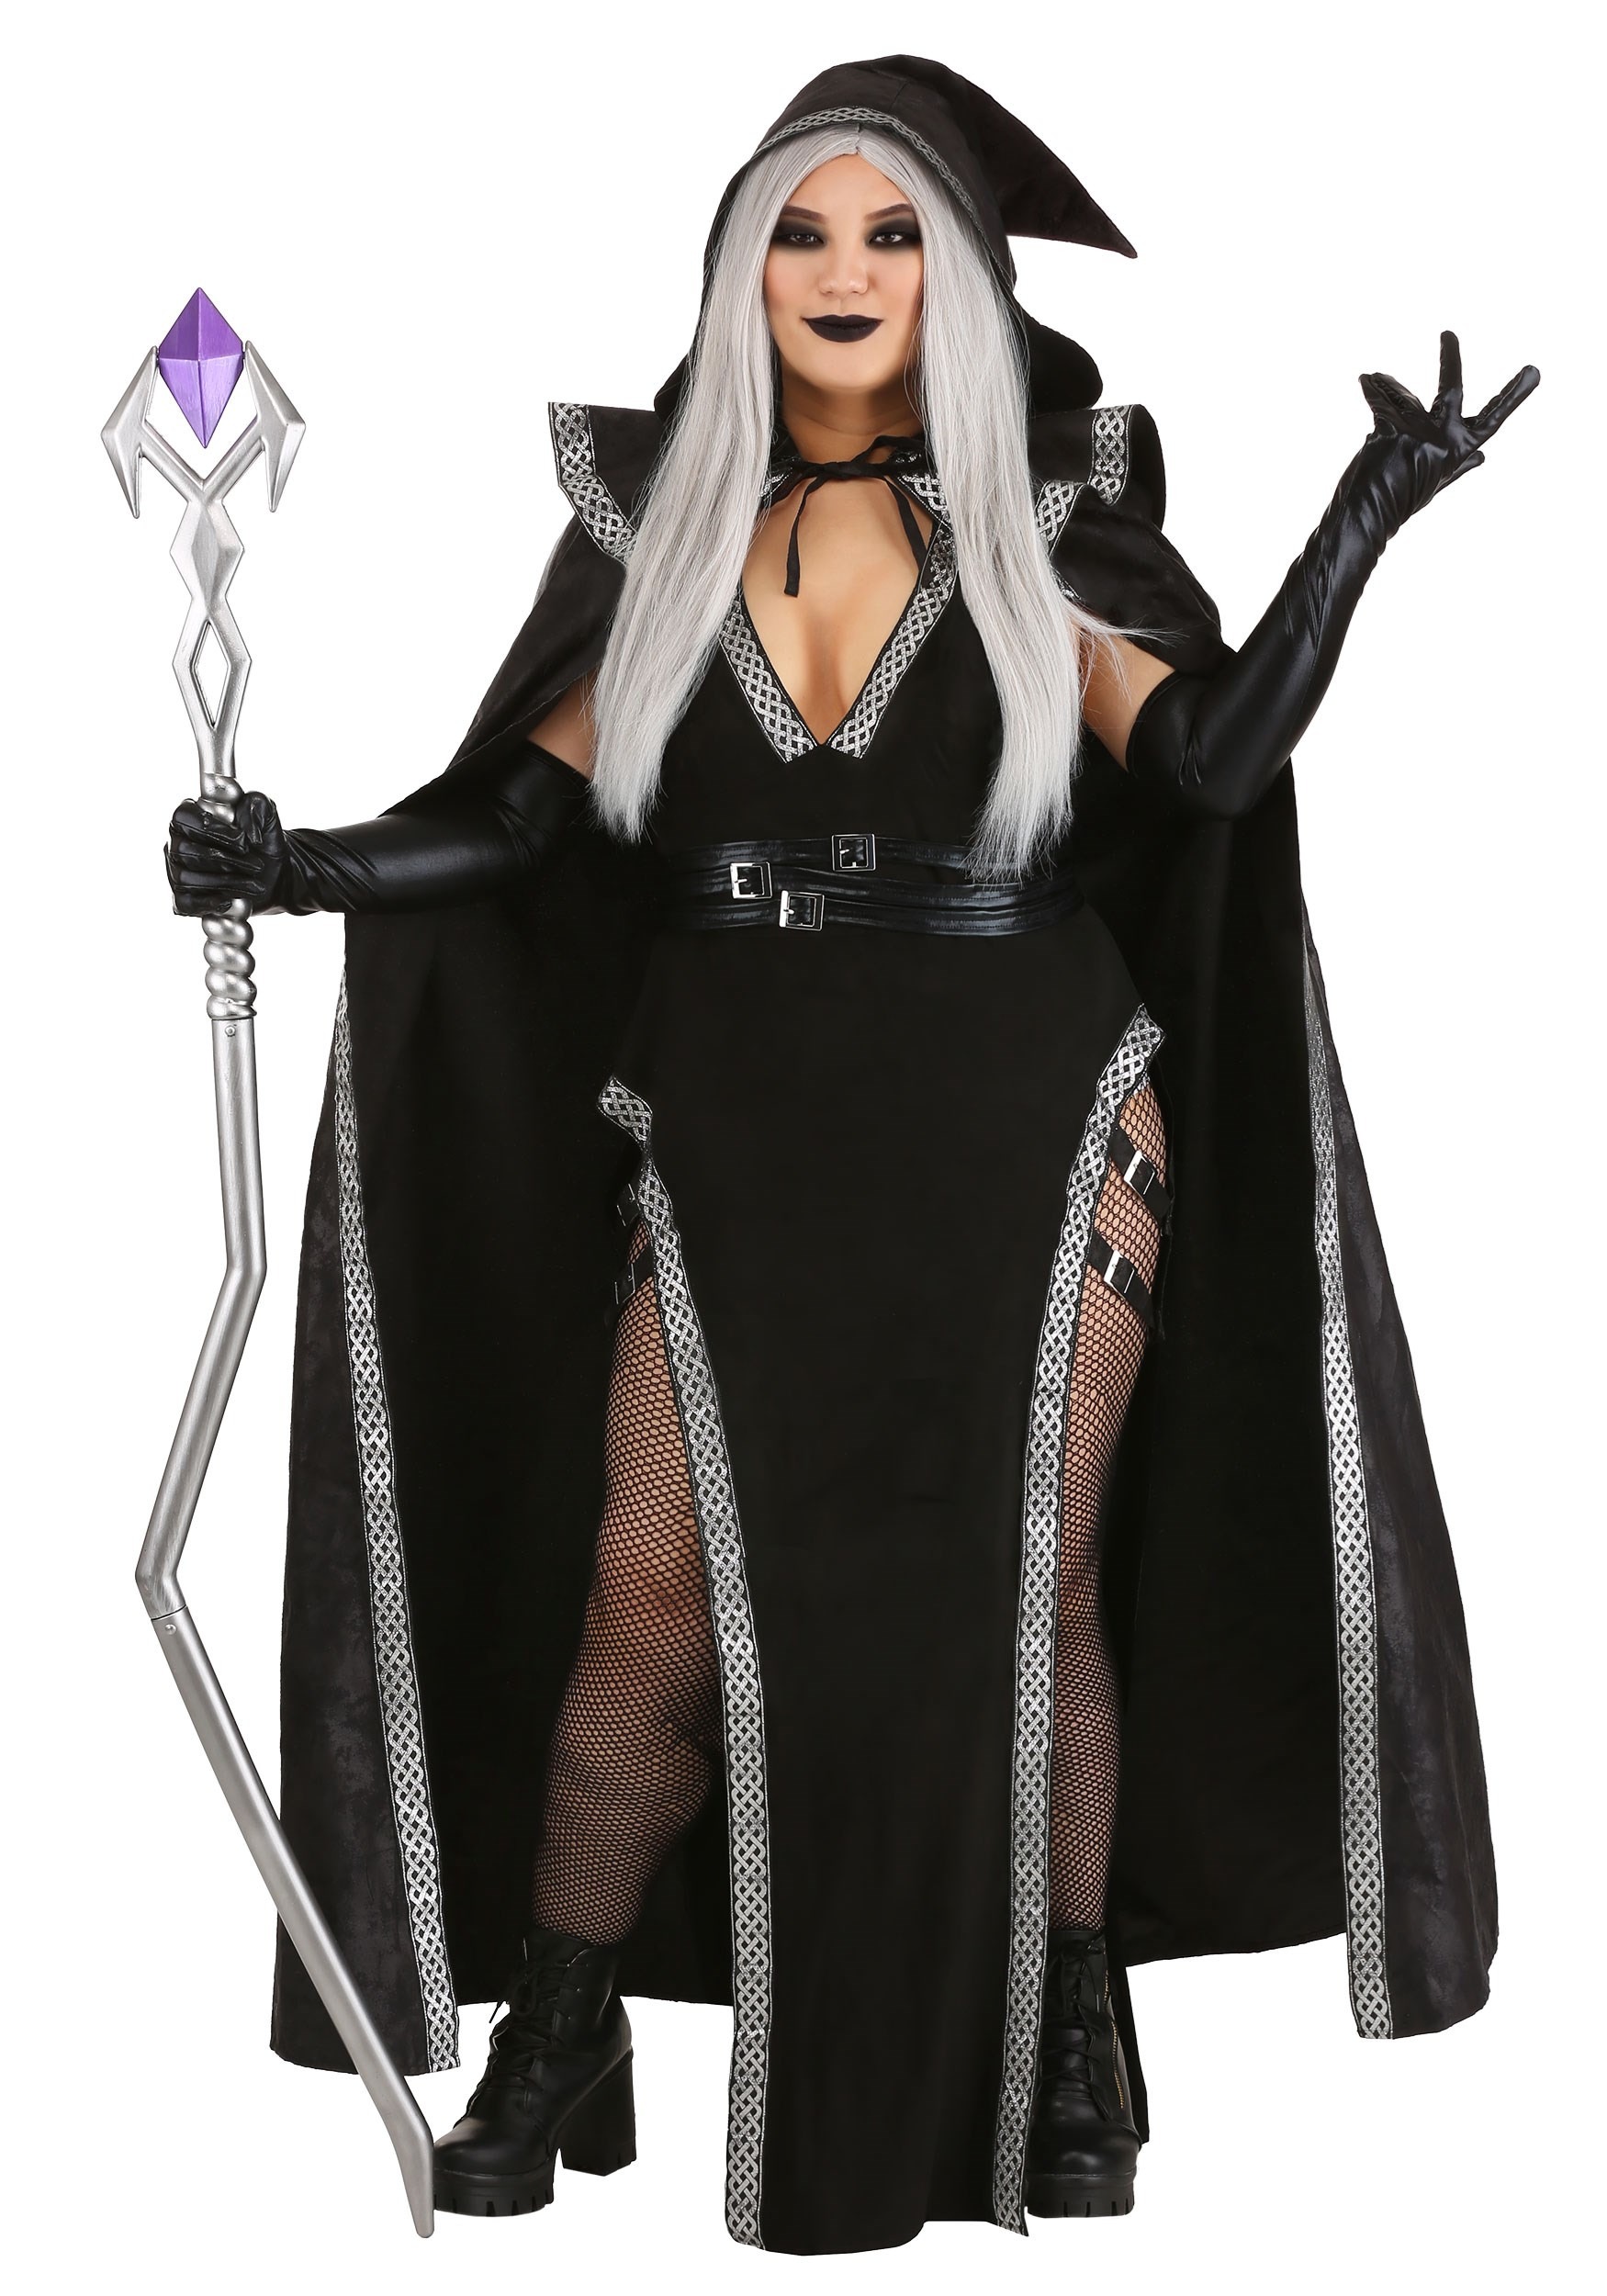 Plus Size Women's Costumes - Plus Size Halloween Costumes for Women